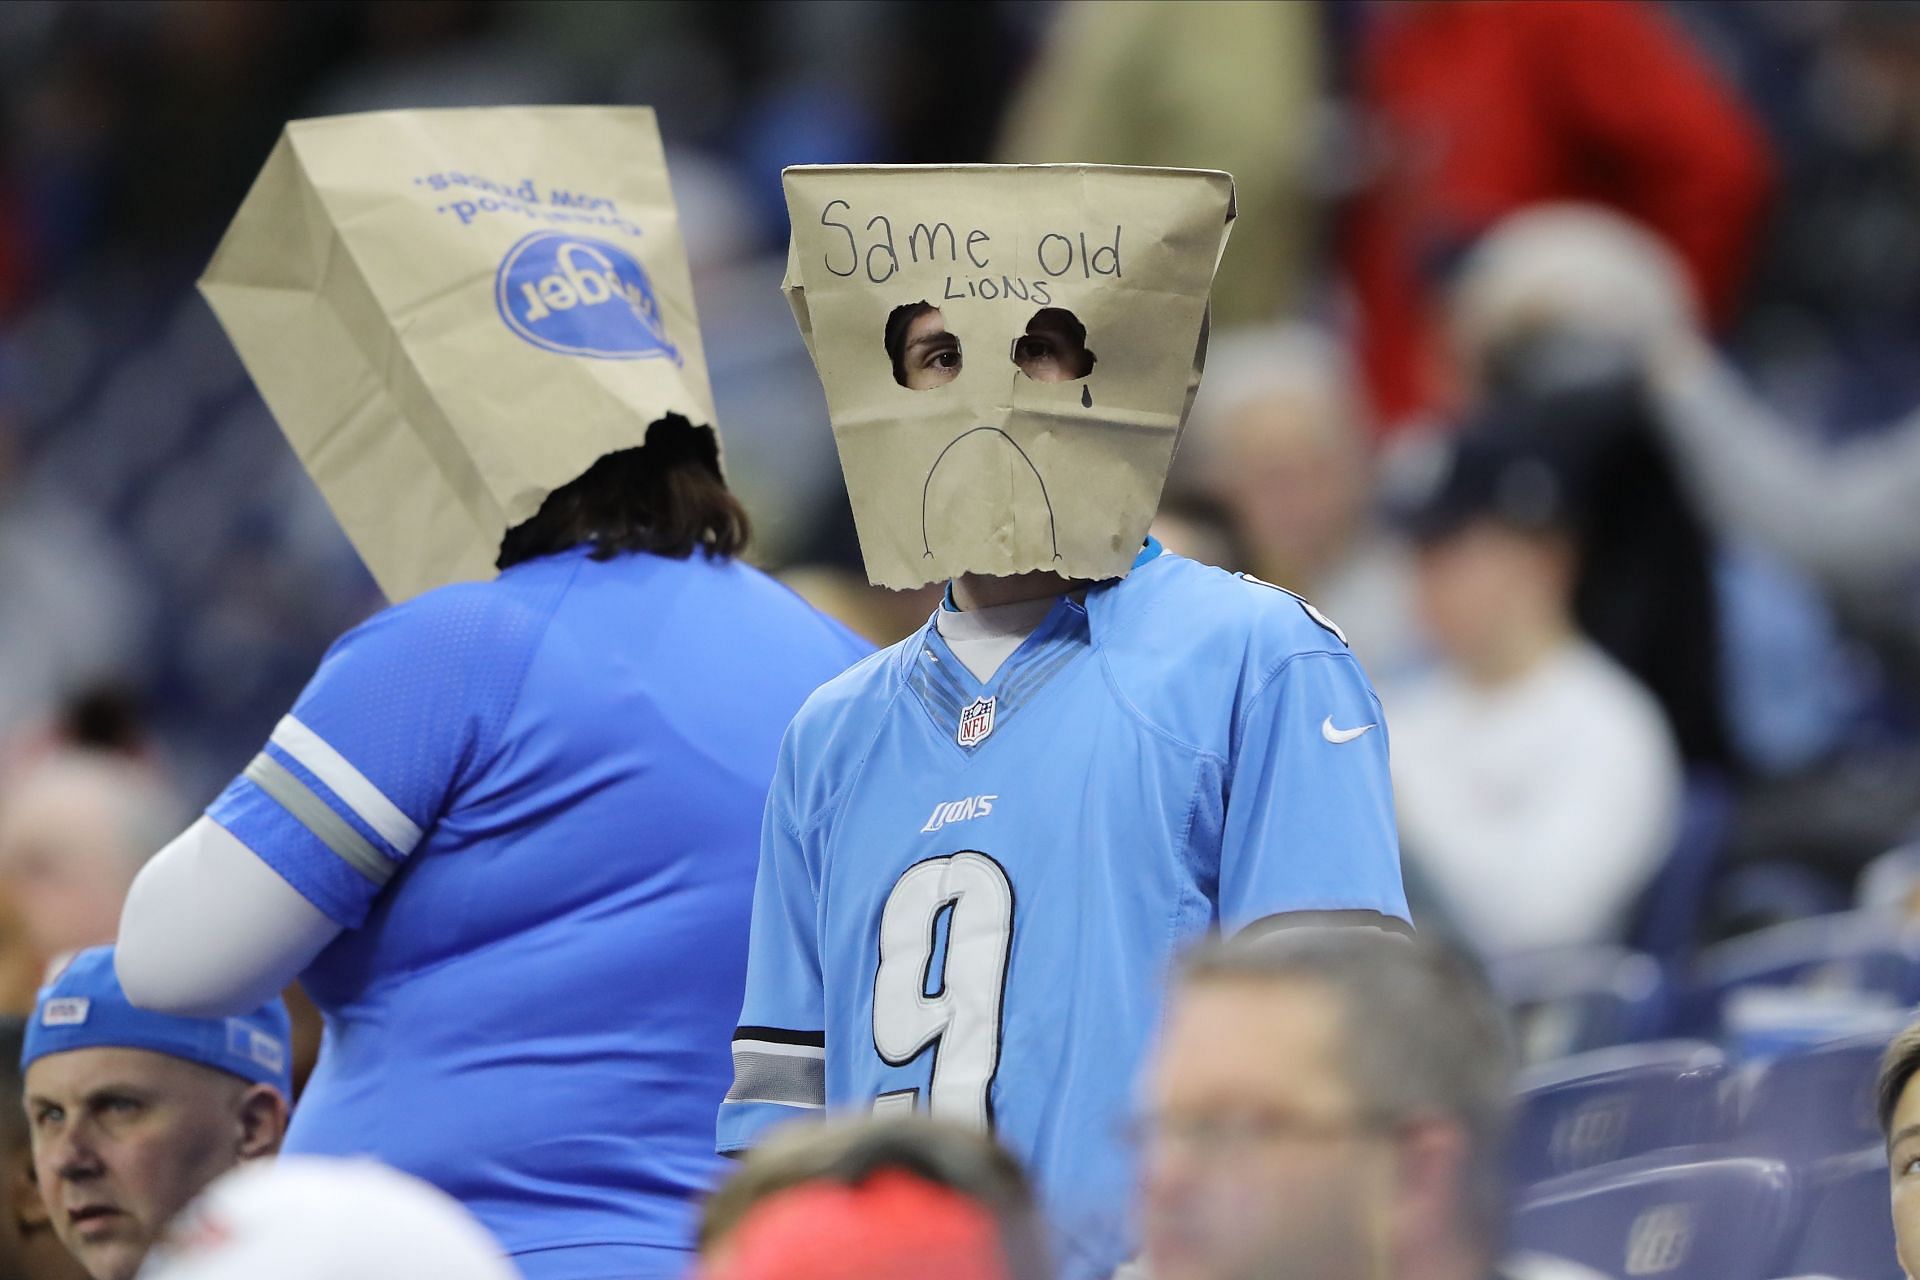 Detroit Lions fans with bags over their heads